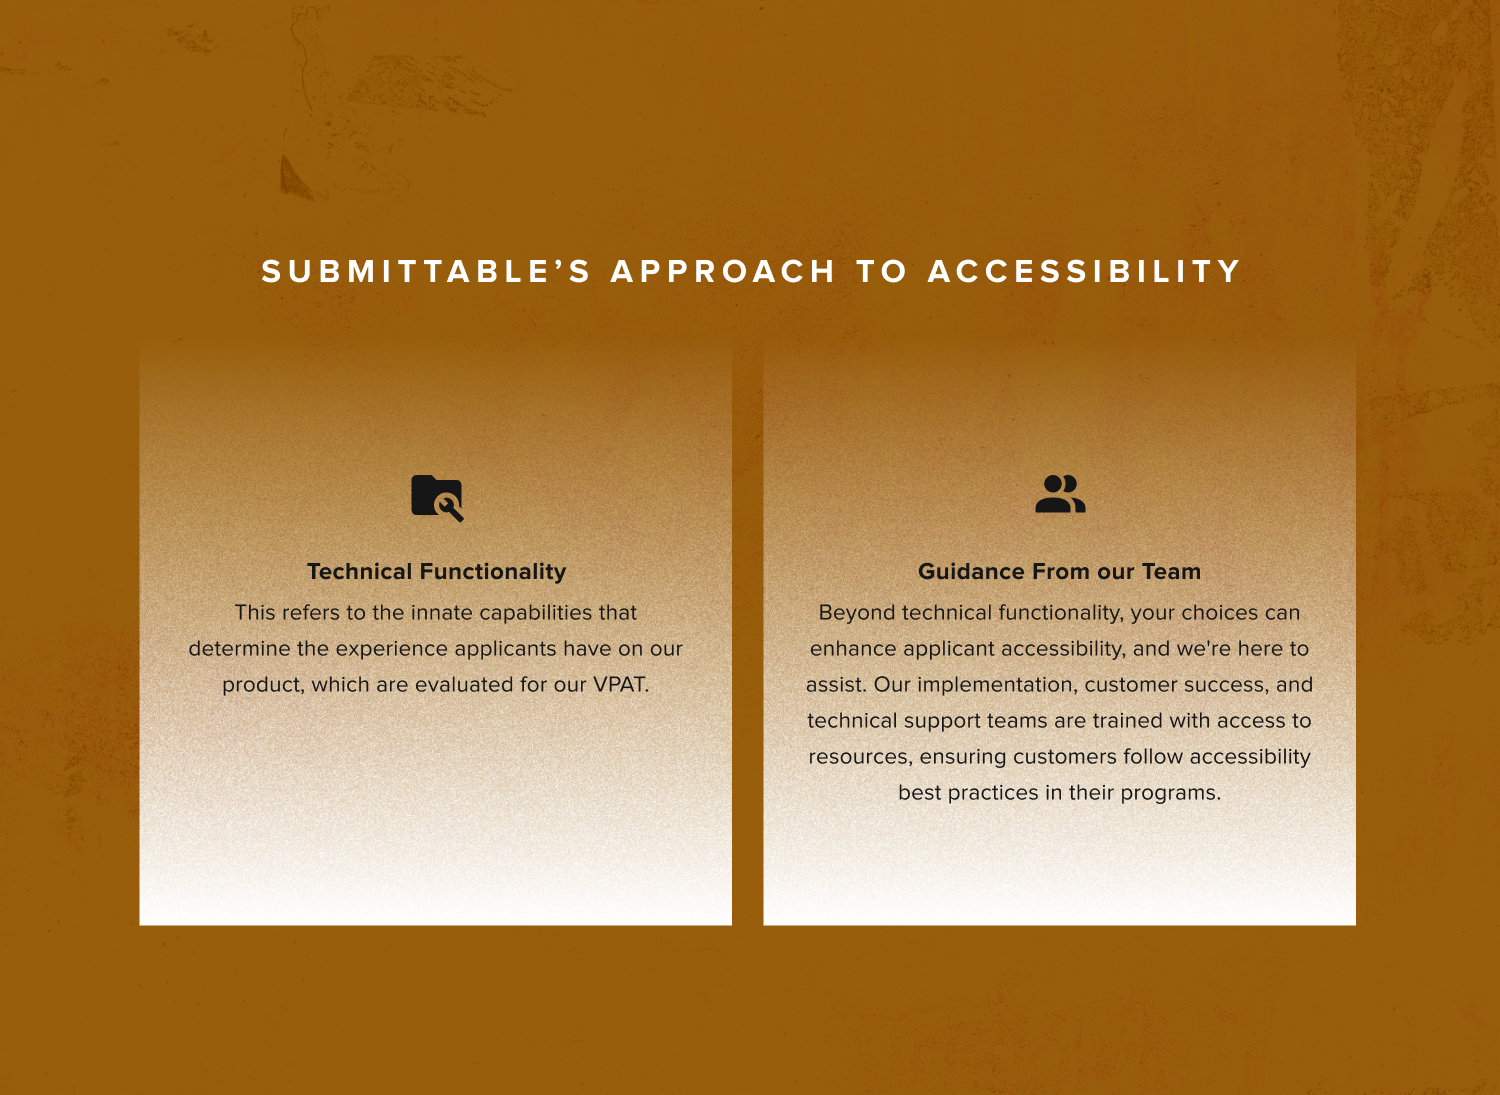 Feature image for the "Submittable’s approach to accessibility" section